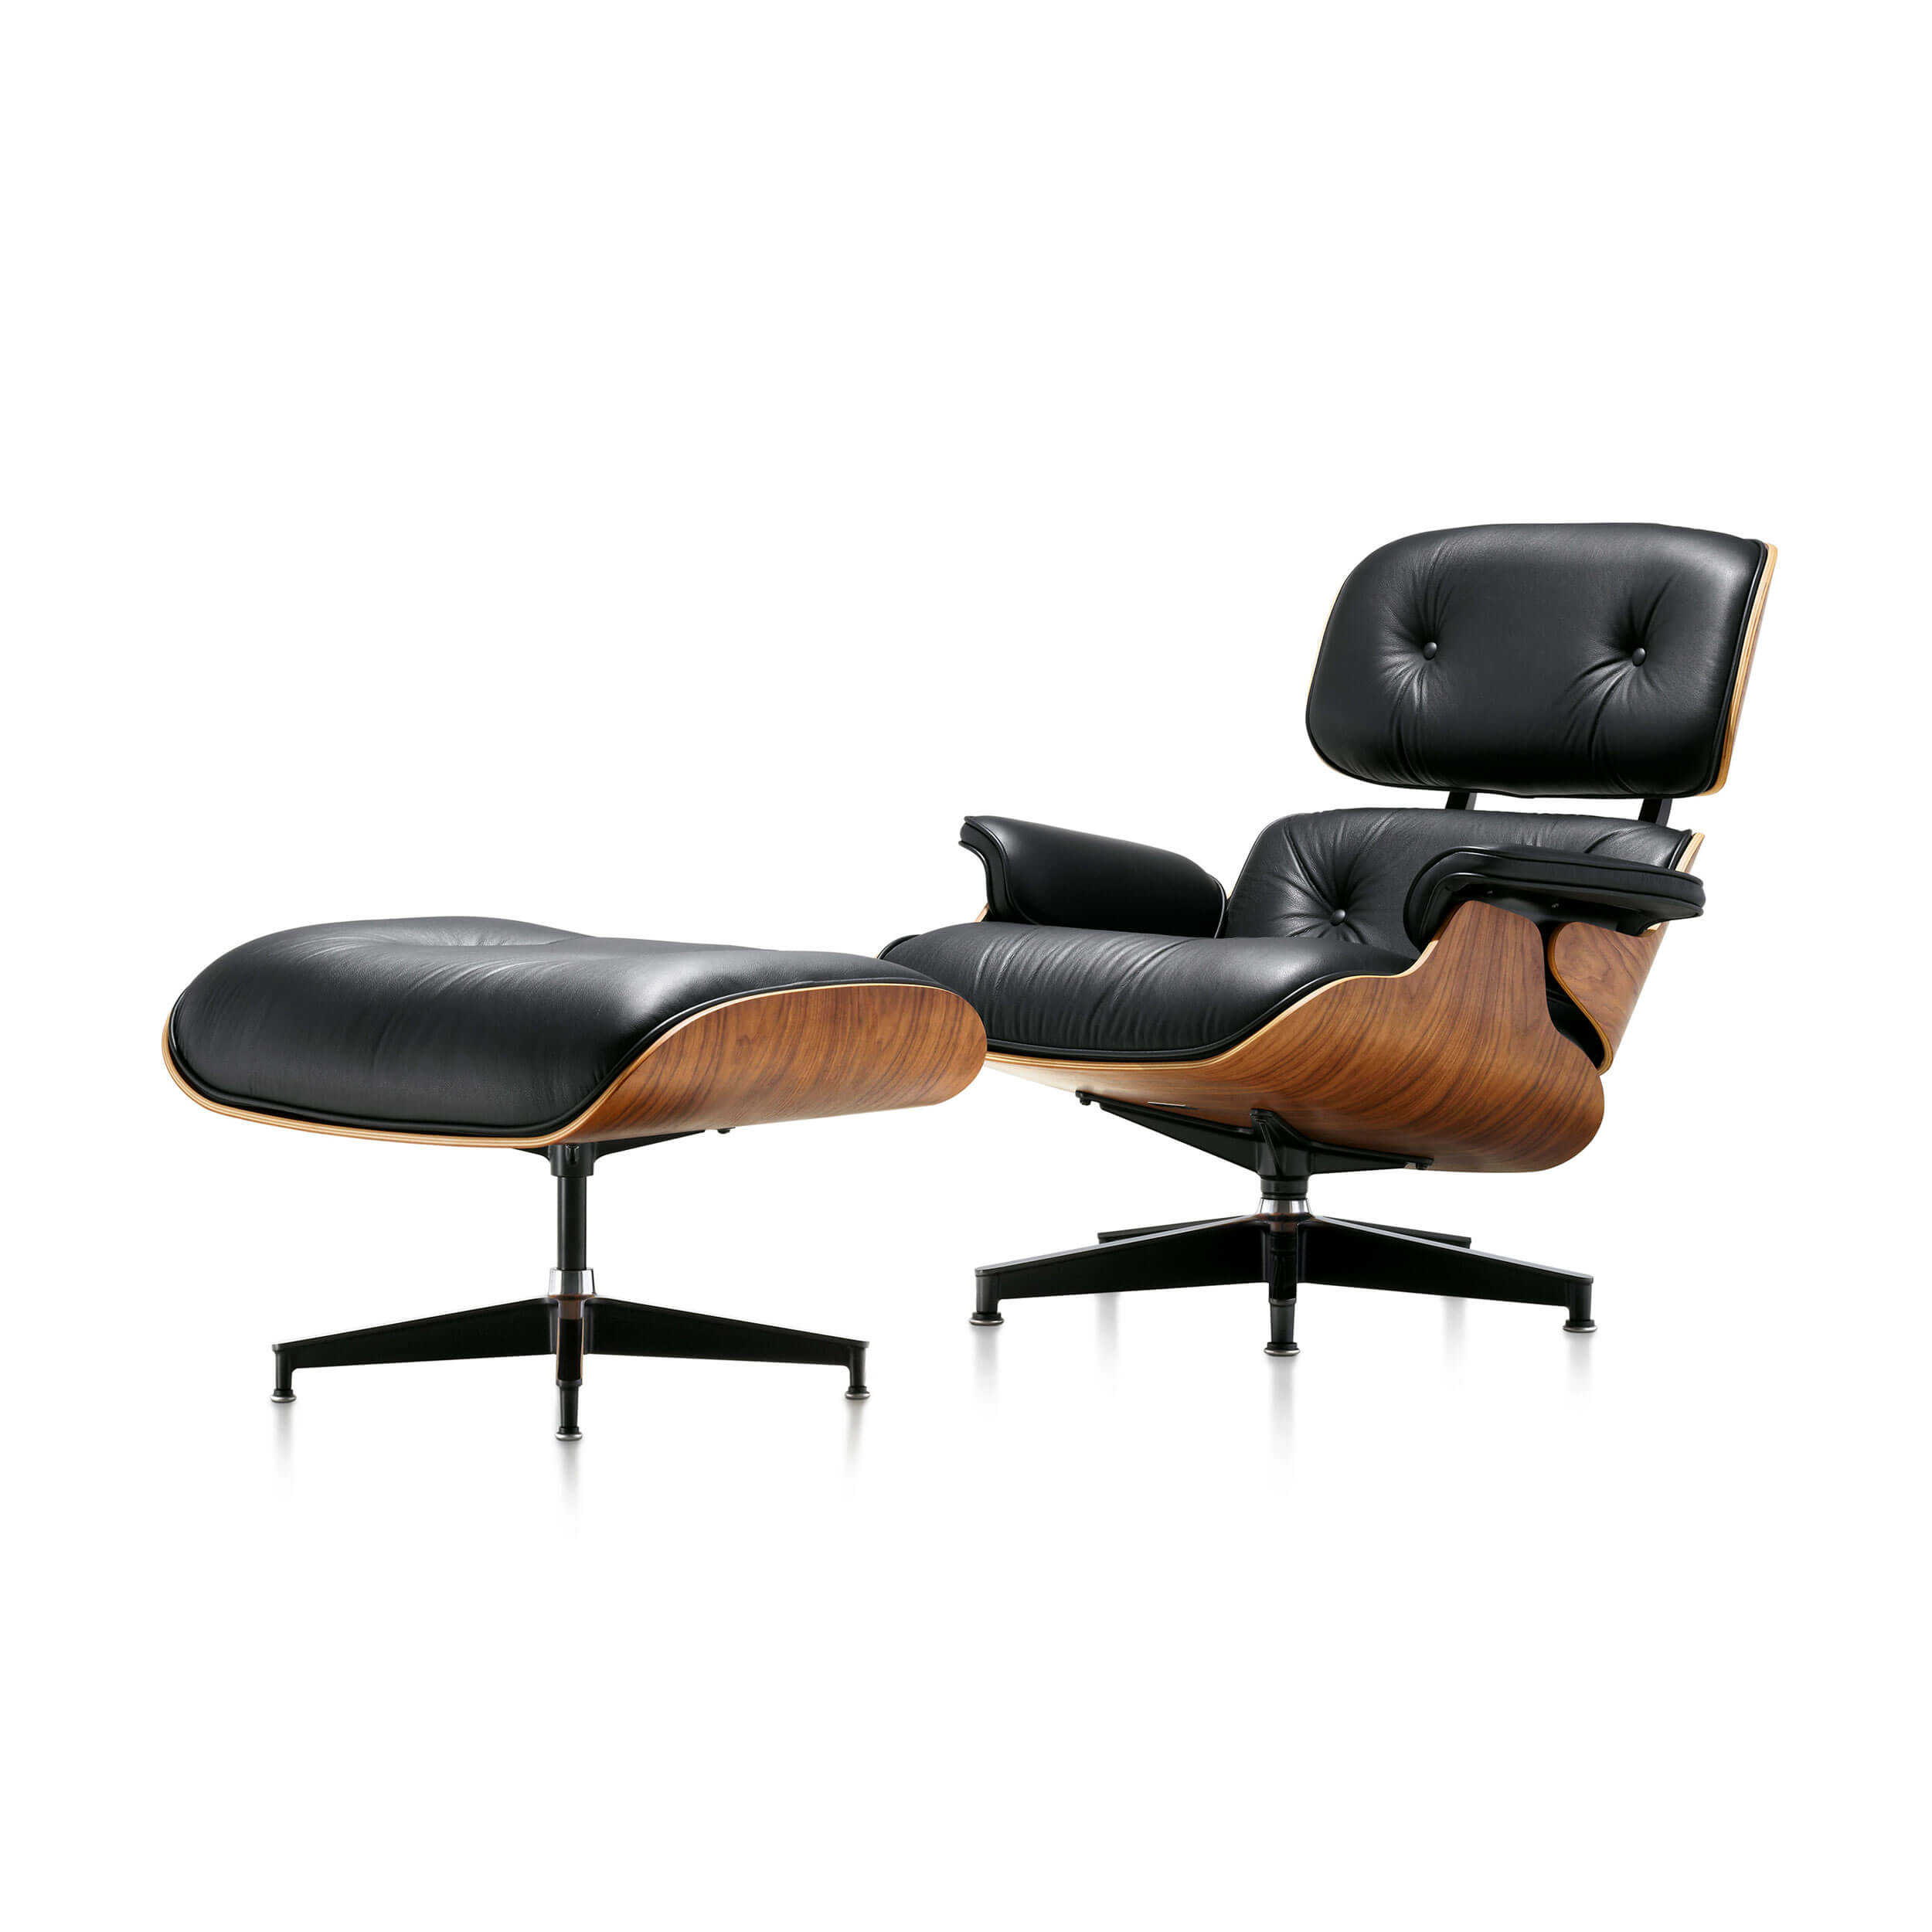 Eames Lounge Chair And Ottoman Authorized Retailer Eq3